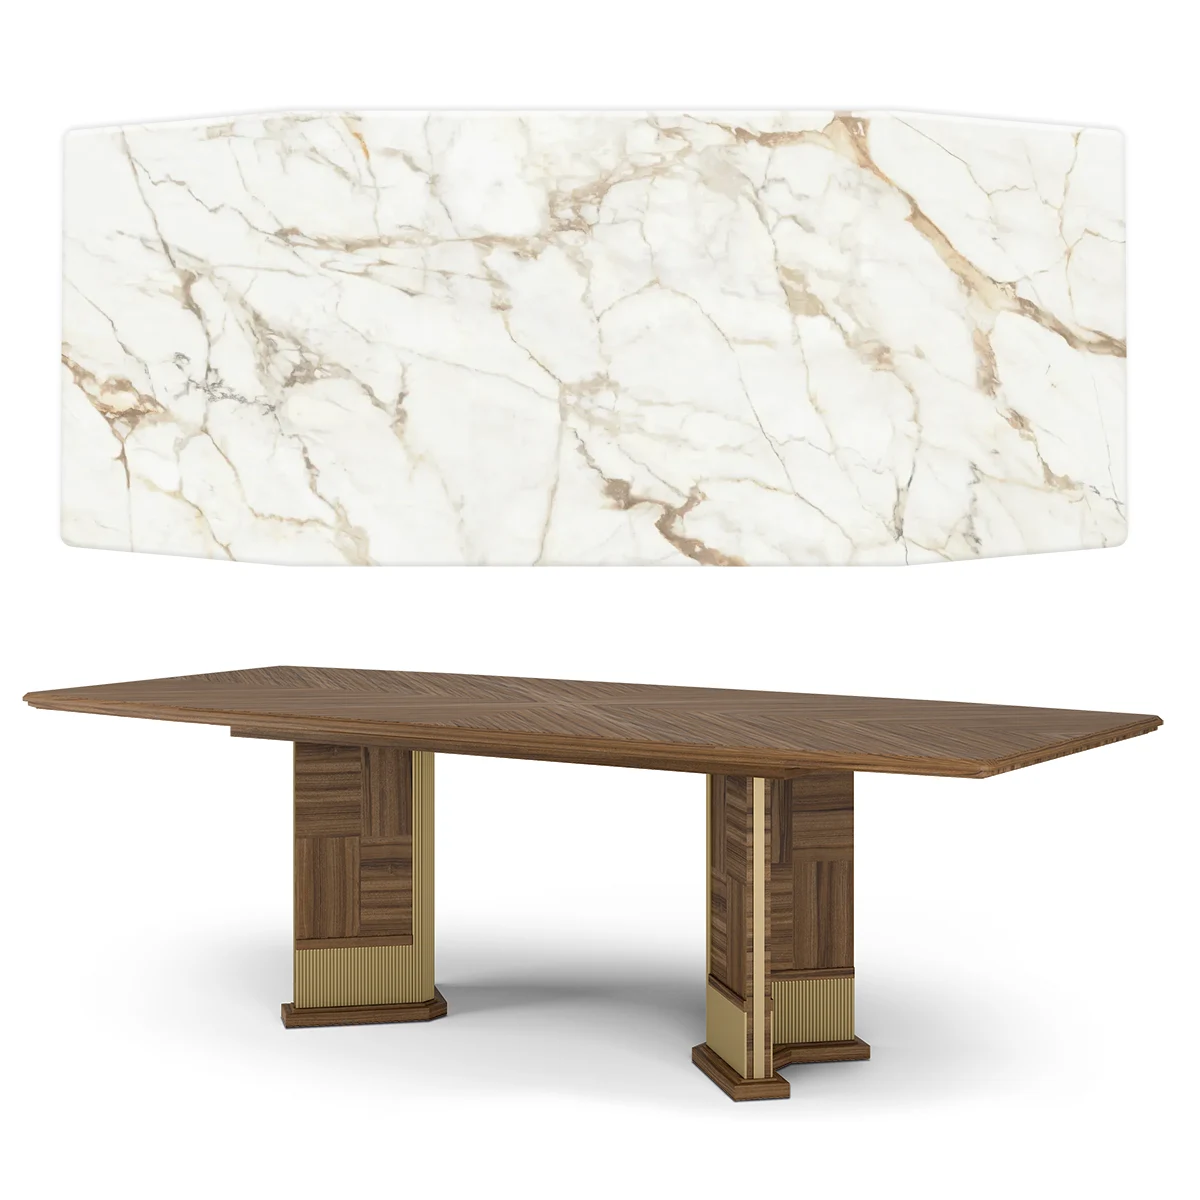 Brera table with marble top made in italy su misura 6